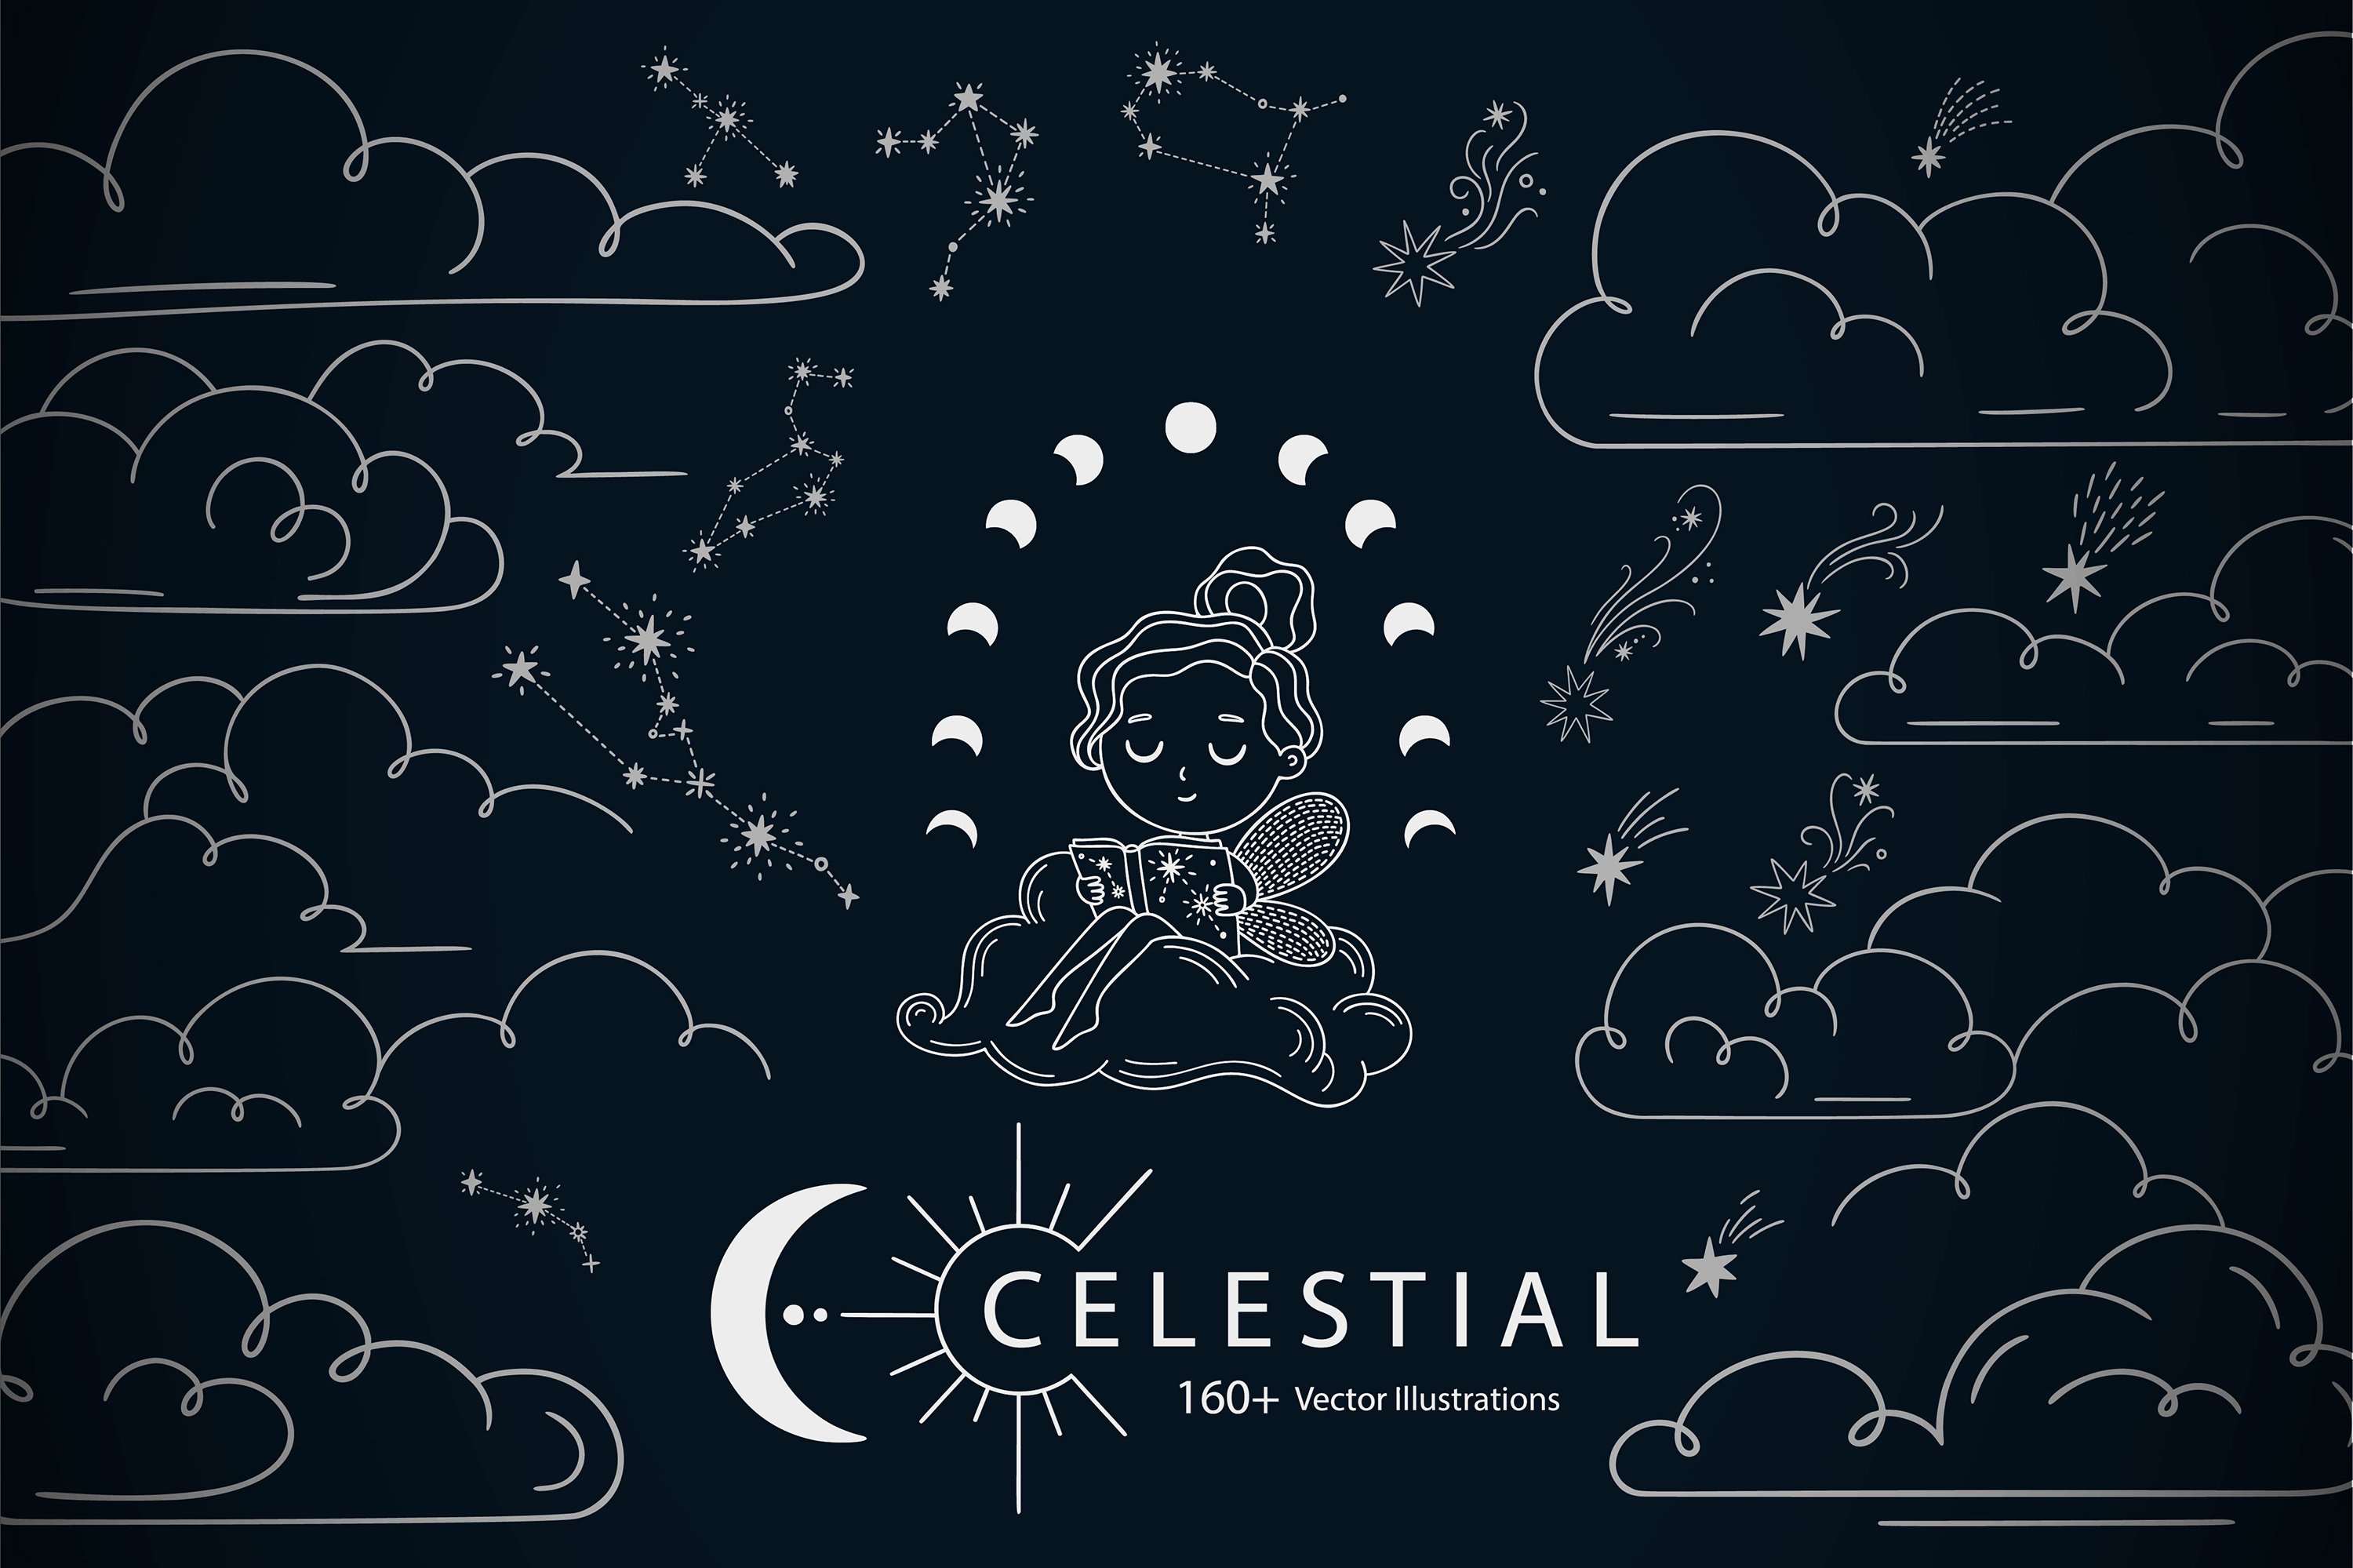 Celestial - Stars and Moons Cliparts cover image.